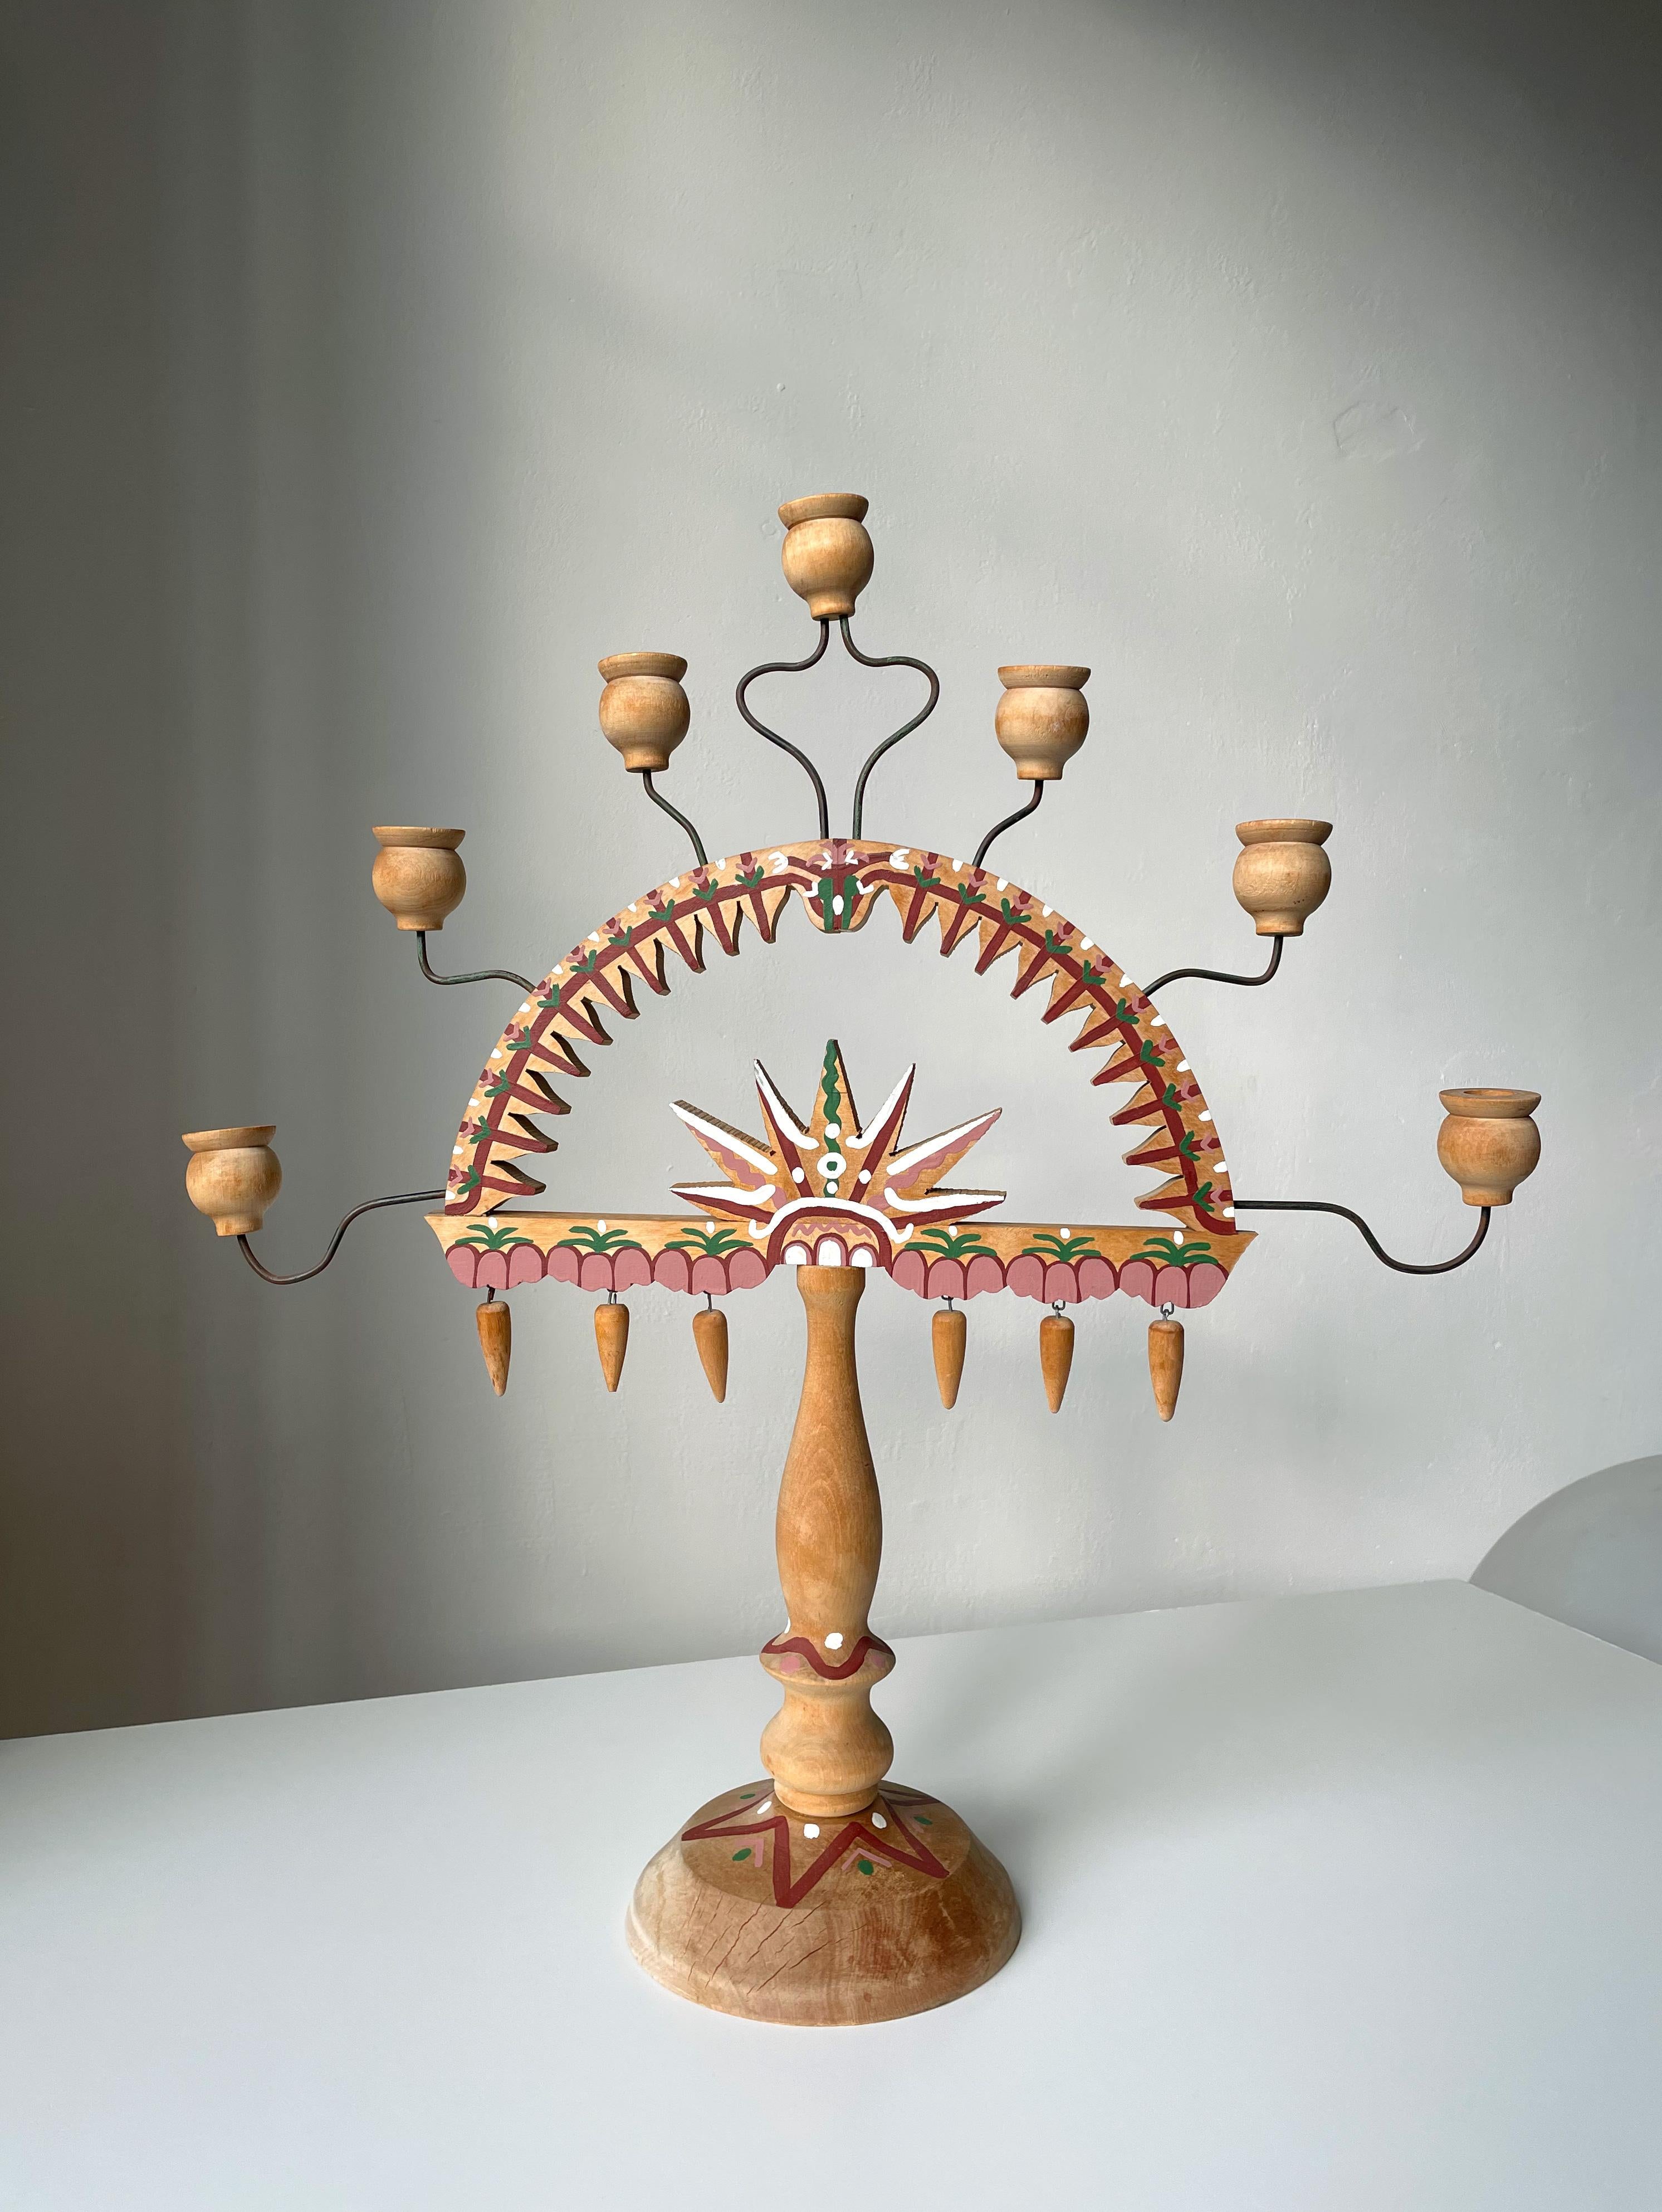 Large folkoristic wooden hand-crafted candelabra with seven arms attached on thin, slightly adjustable metal rods. Handpainted in Nordic folklore style with burgundy, rose, green and white colors in organic, floral and star shaped patterns.